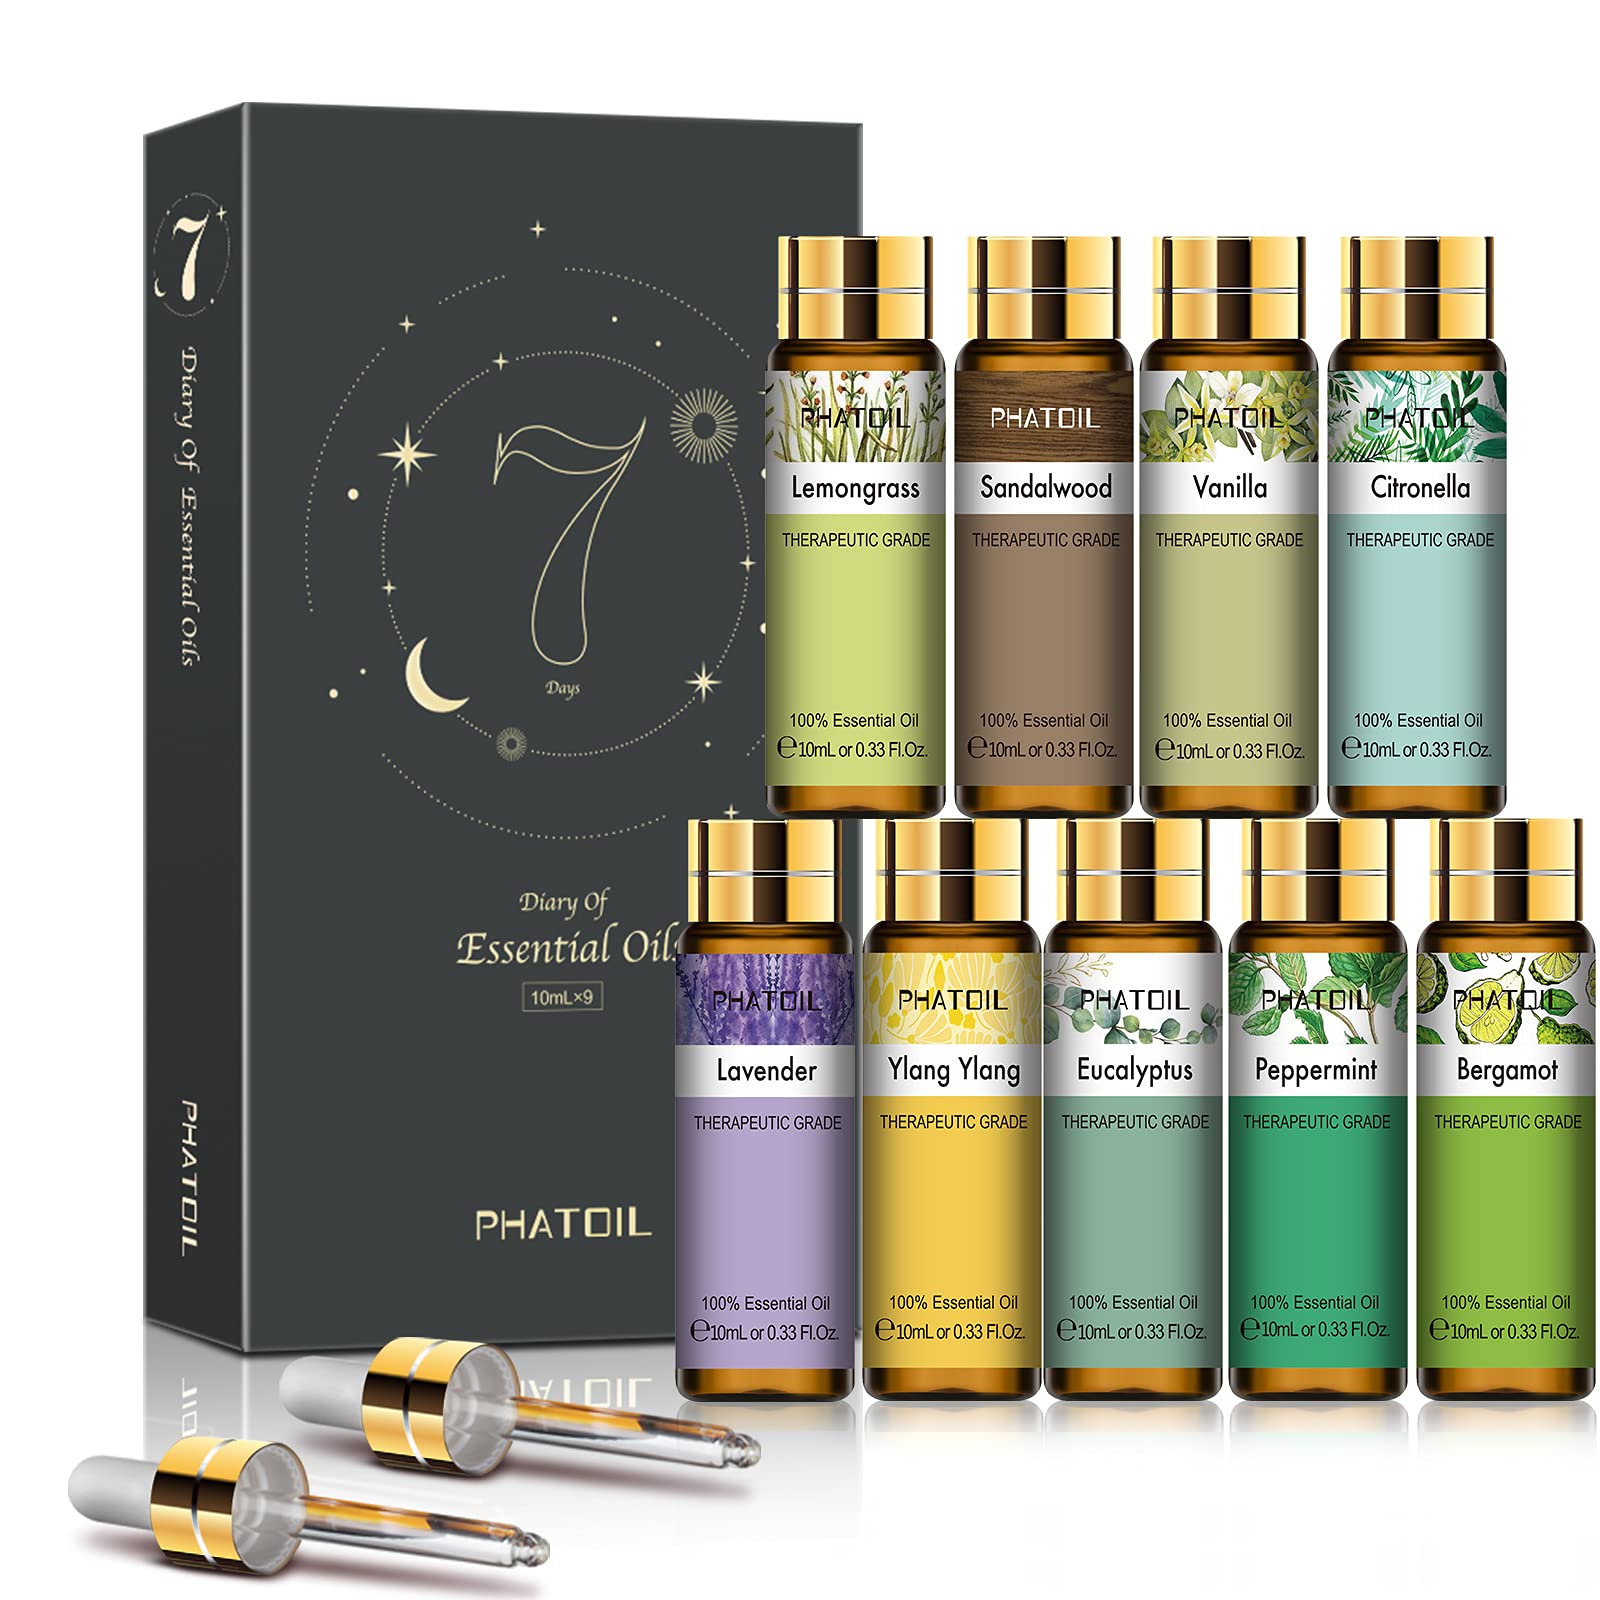 PHATOIL 9PCS Essential Oils Gift Set, 10ml/0.33fl.oz Scented Oils for Soap,  Candle Making, Premium Quality Essential Oils for Diffuser, Humidifier,  Massage Bergamot 0.33 Fl Oz (Pack of 9)